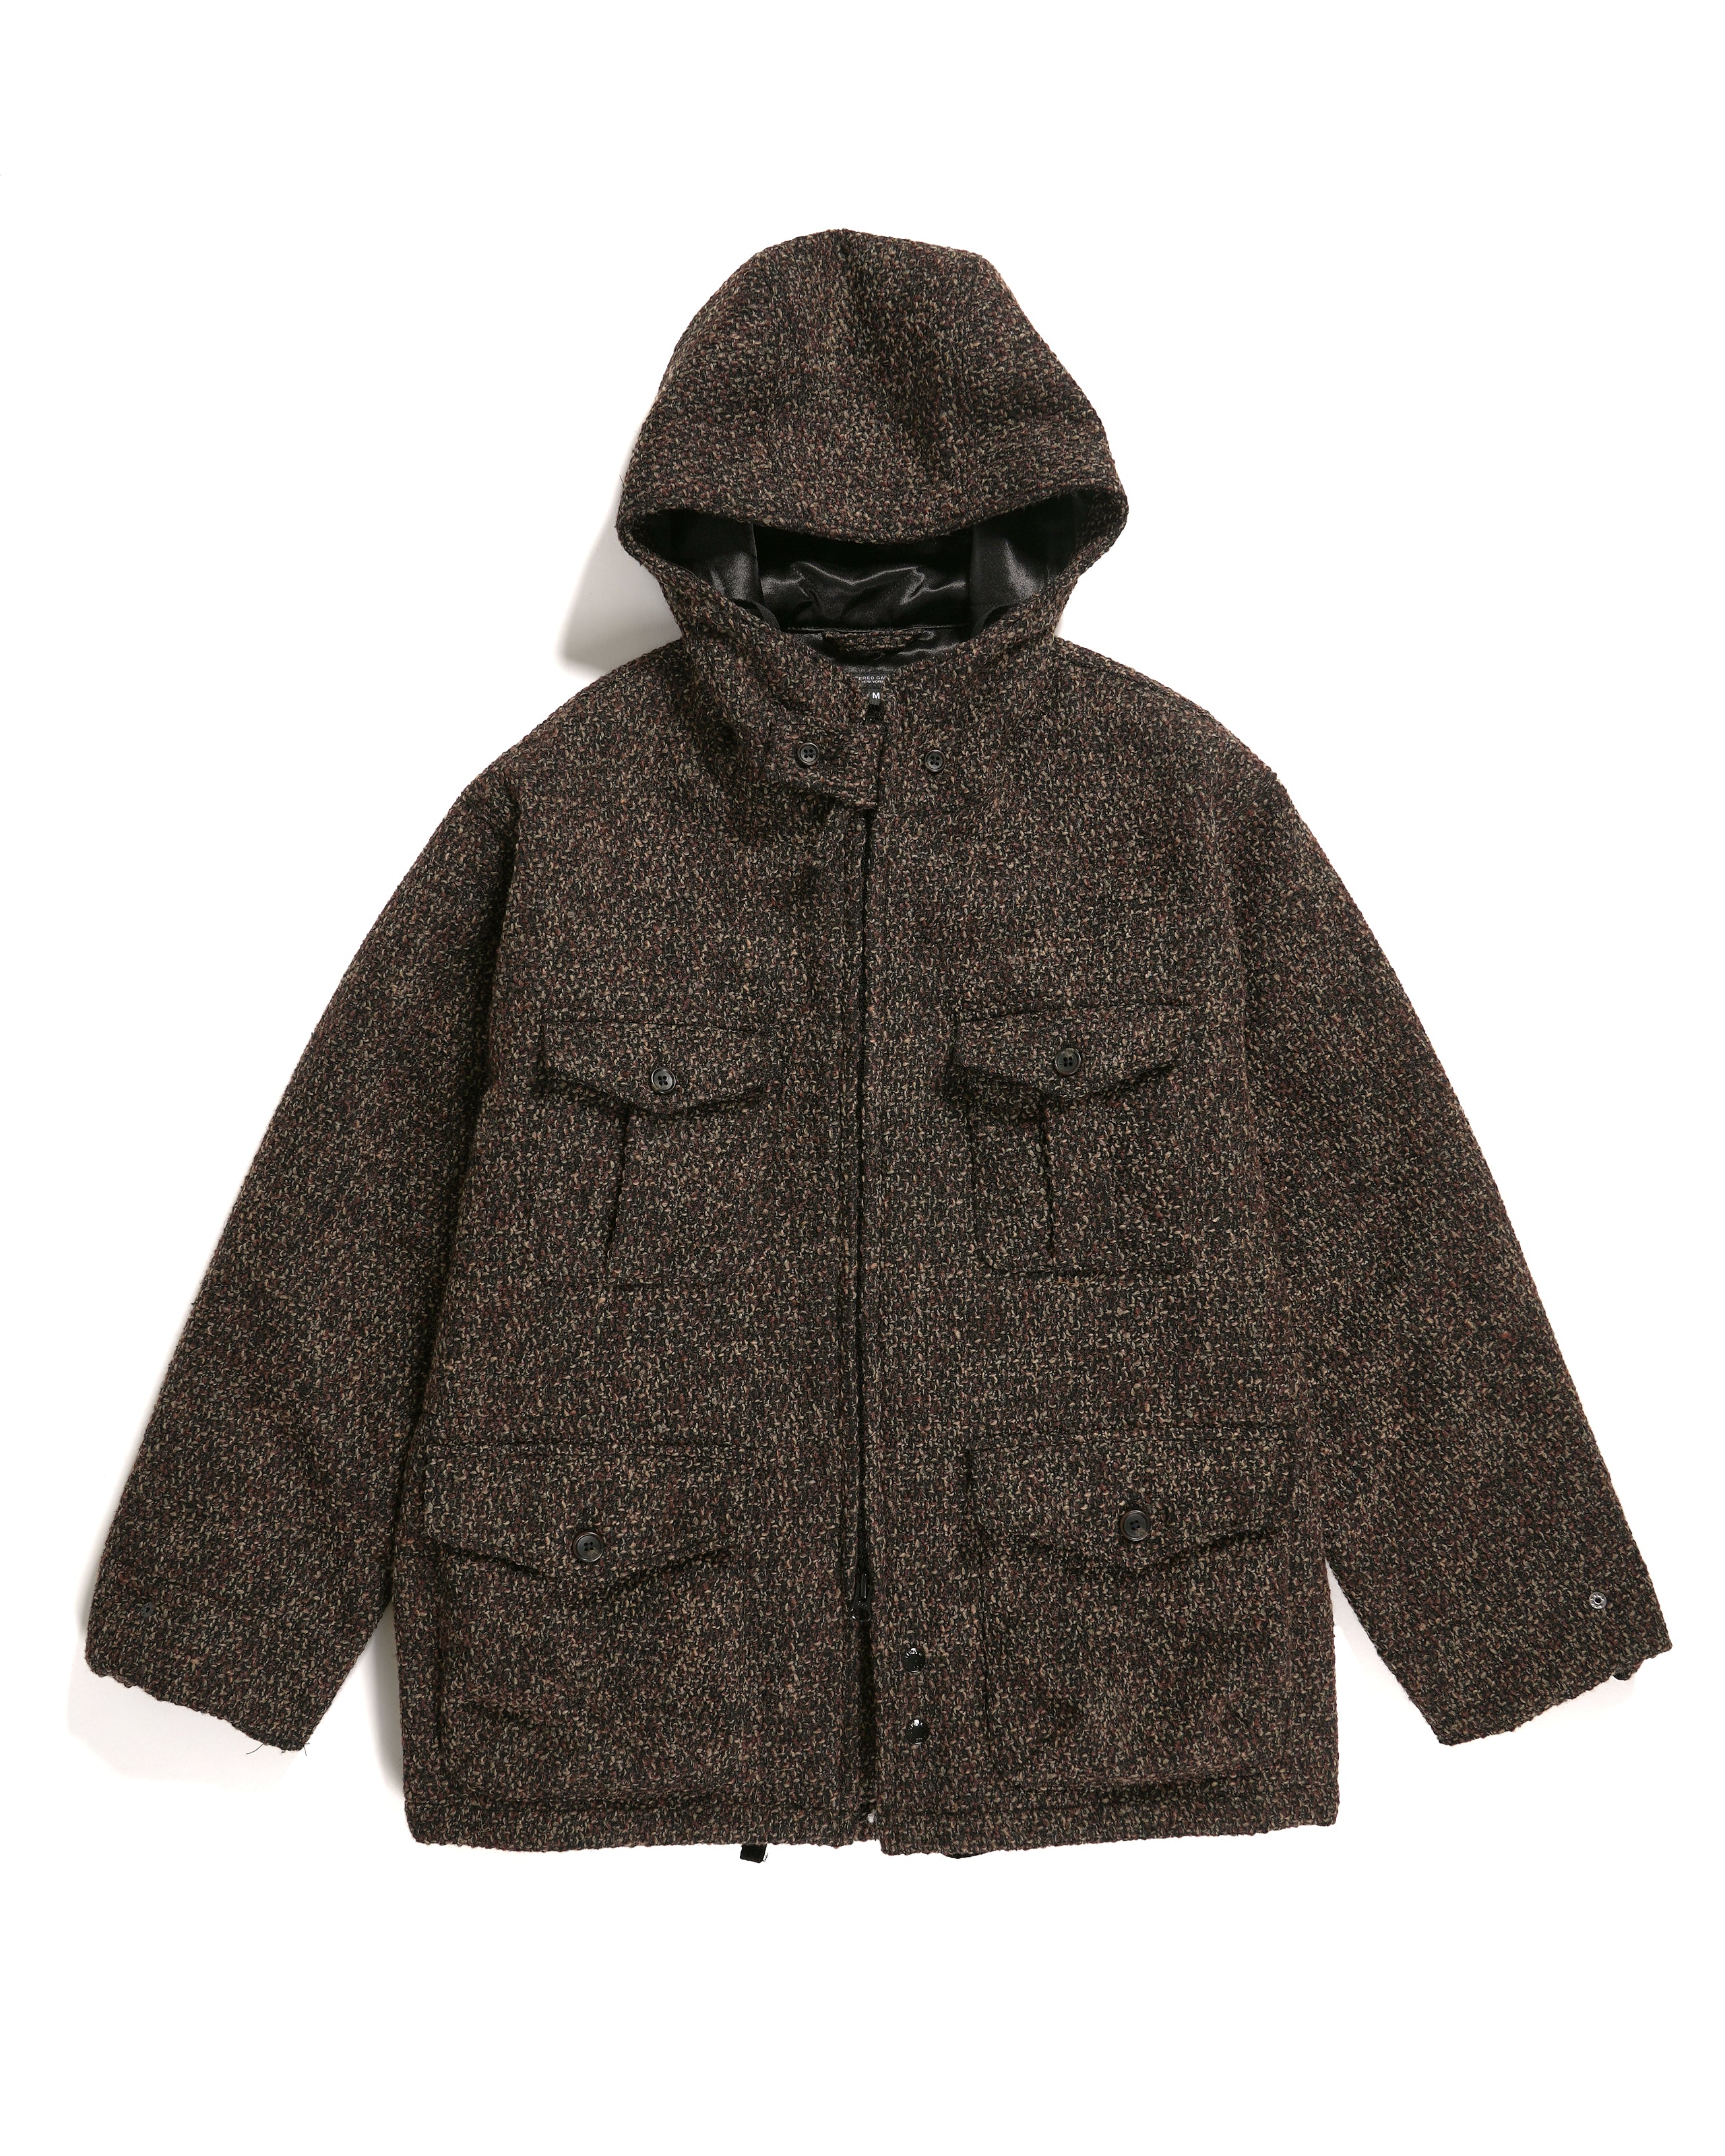 SAS Jacket - Dk. Brown Polyester Wool Tweed Boucle | Nepenthes New